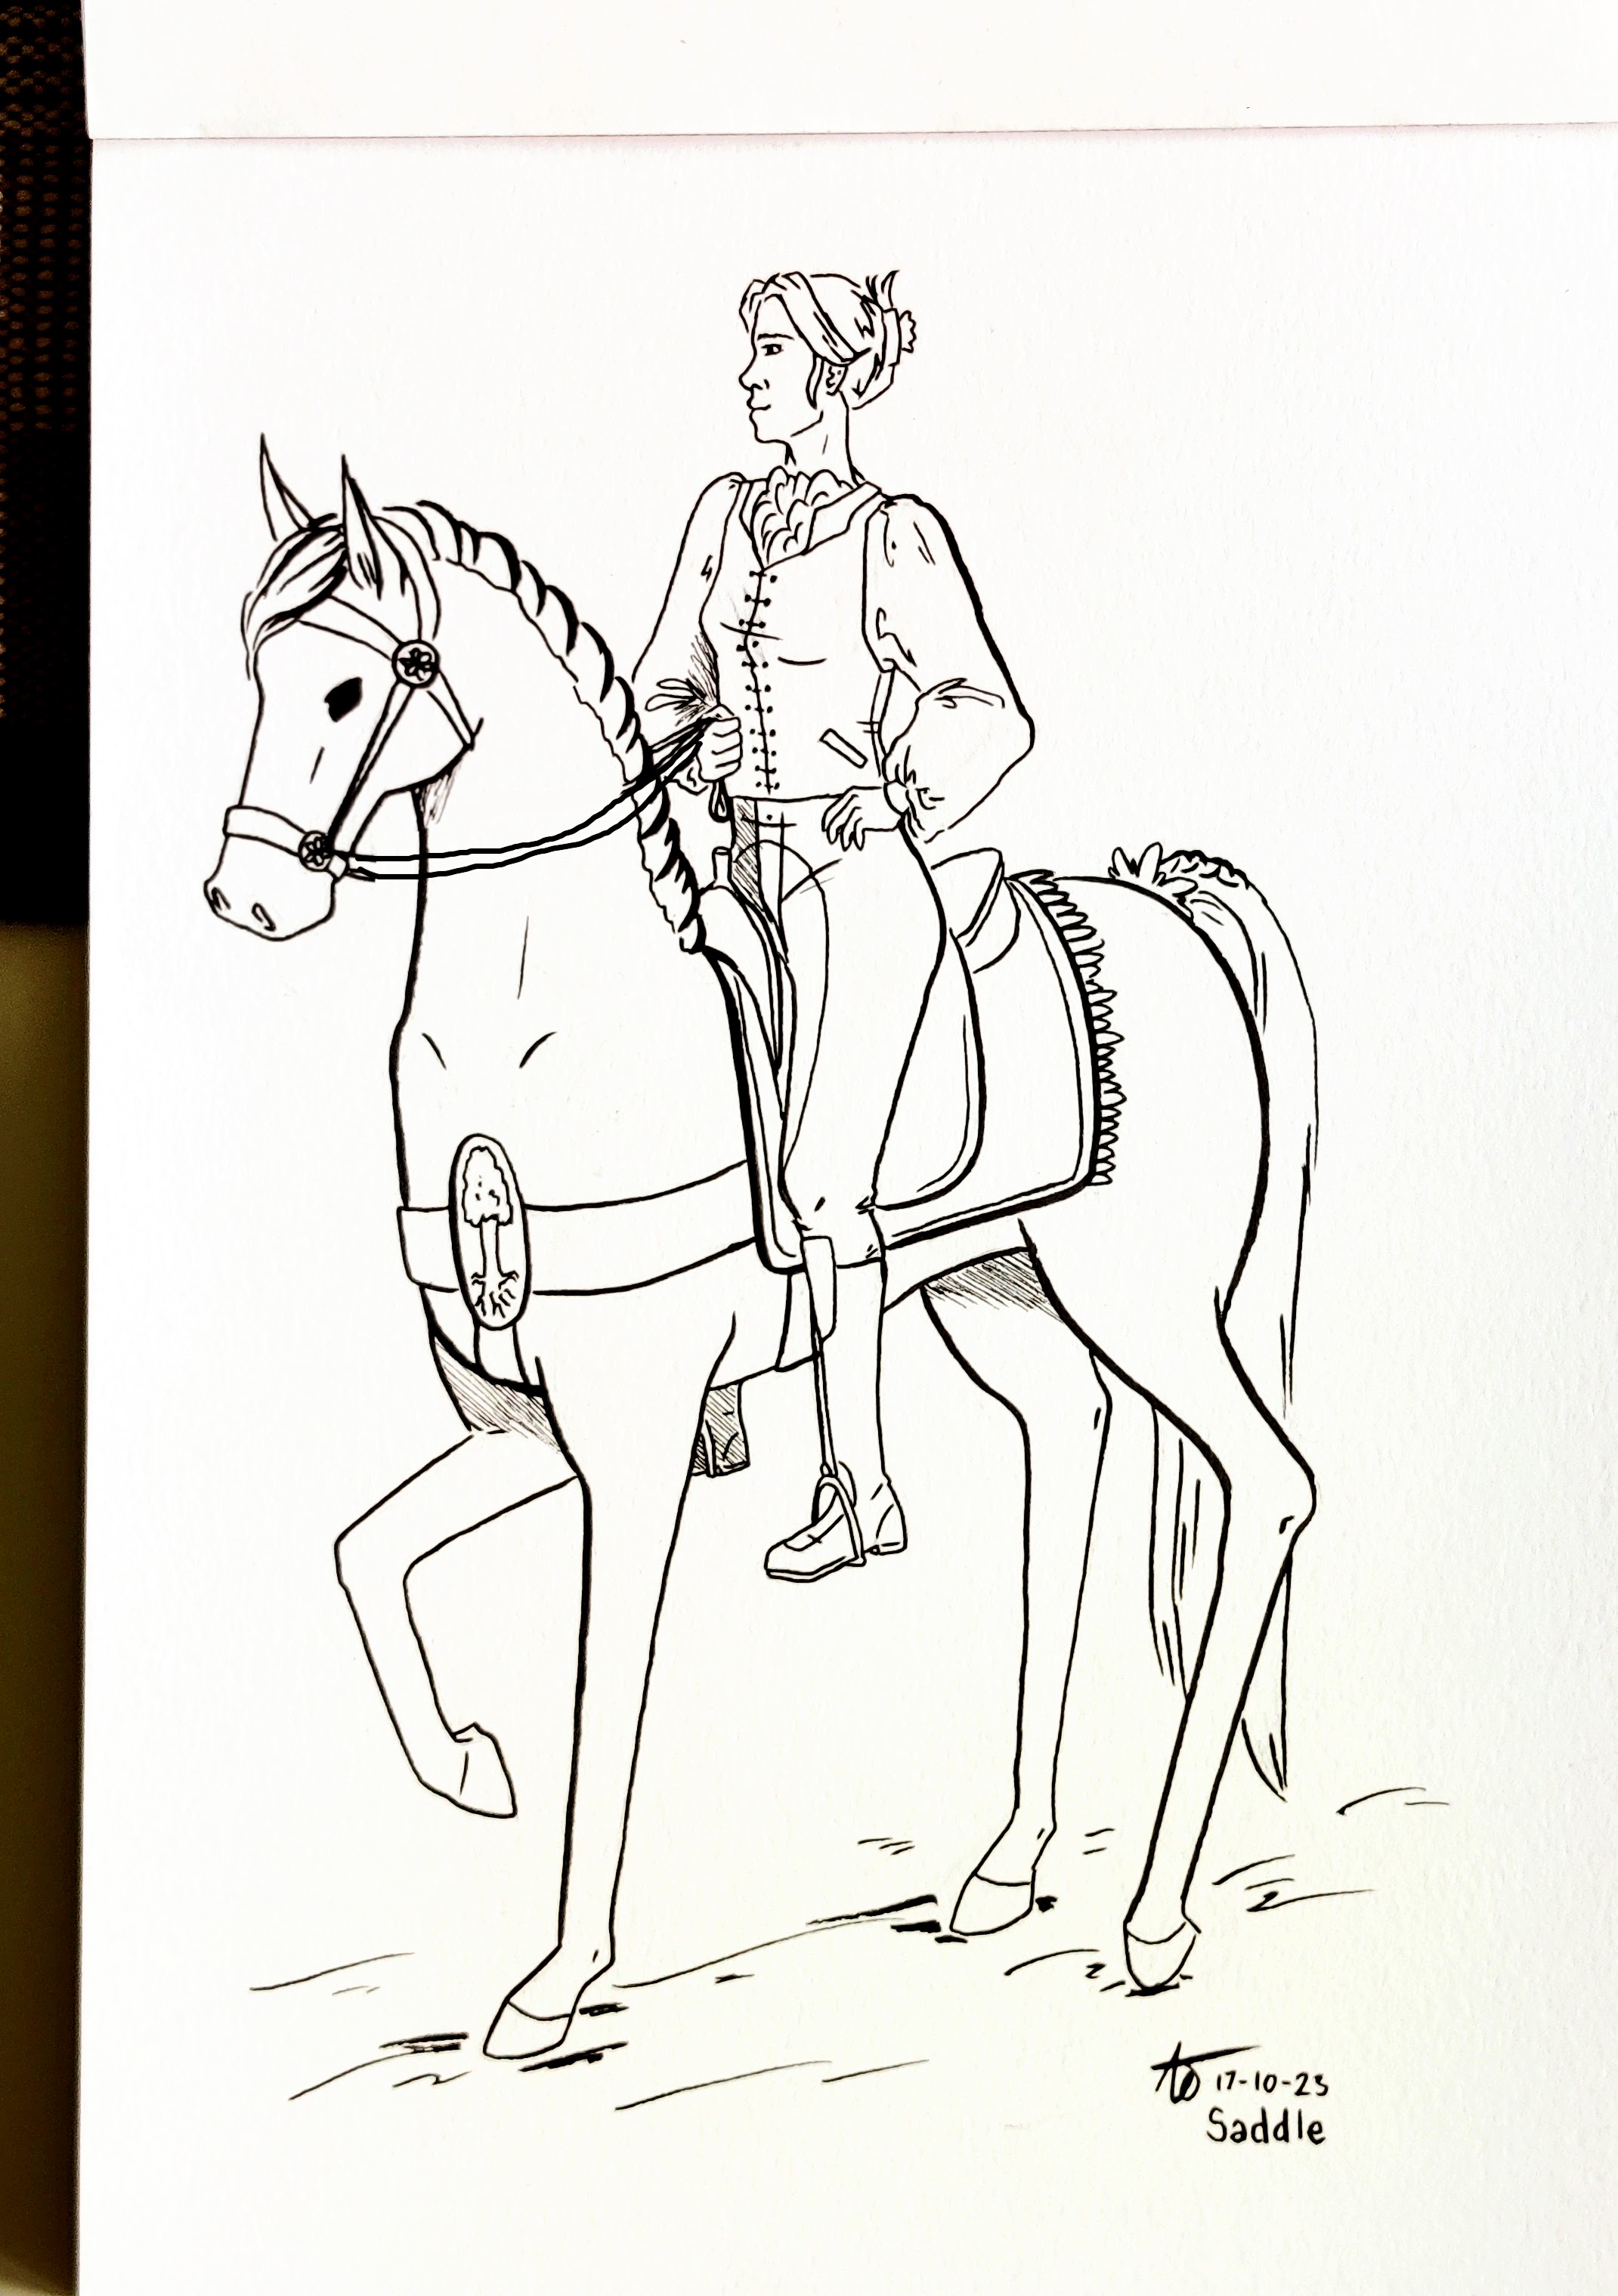 A drawing in ink picturing a young woman on her horse. She is dressed in a fine vest and her hair is up. The horse has a decorated bridle and saddle.